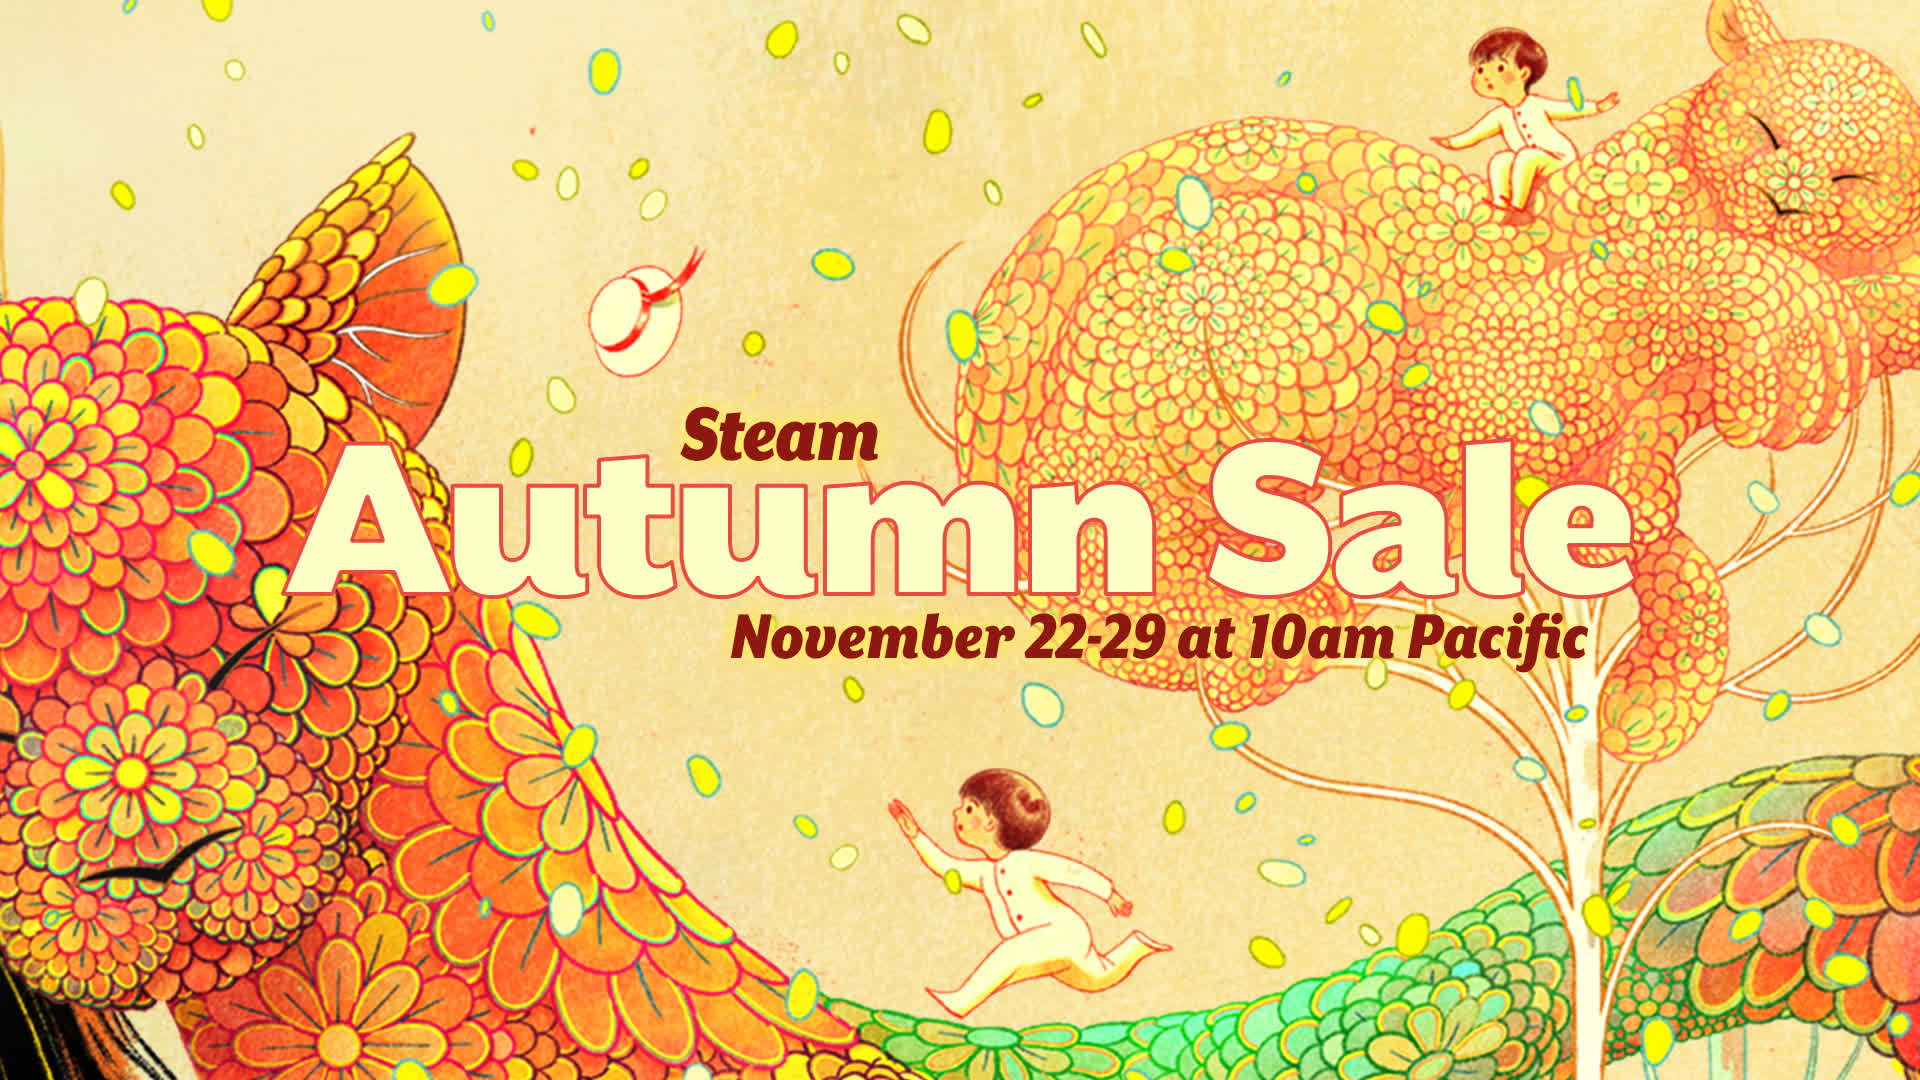 Steam's annual Autumn Sale aims to keep you entertained during the holidays